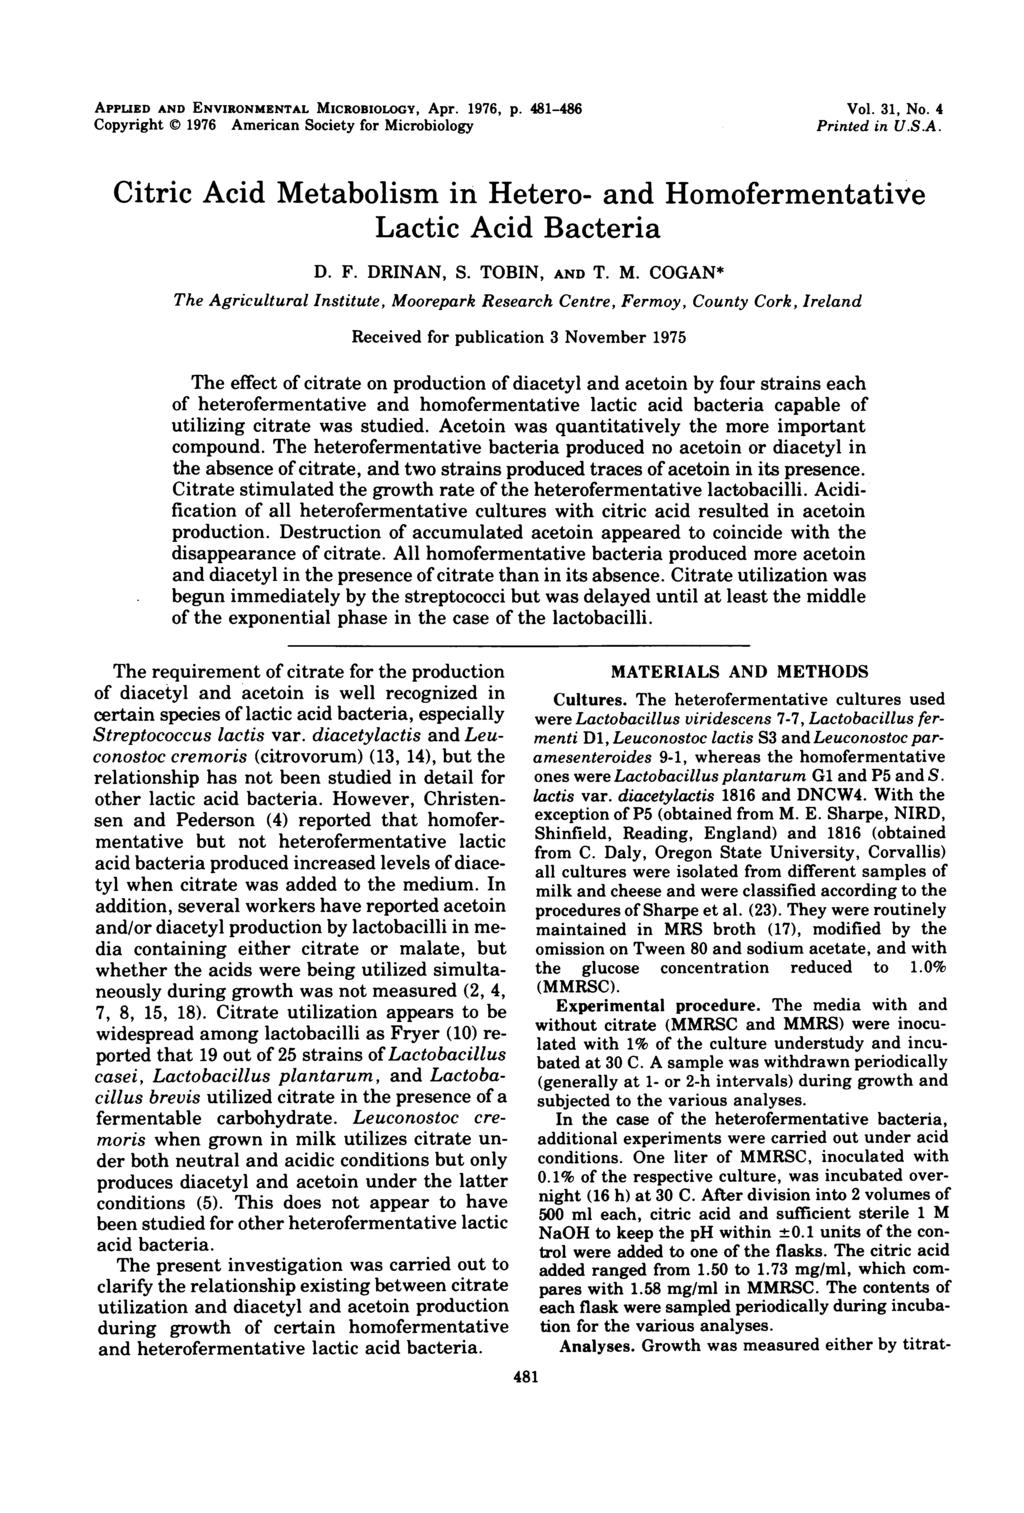 APPLIED AND ENVIRONMENTAL MICROBIOLOGY, Apr. 1976, p. 481-486 Copyright D 1976 American Society for Microbiology Vol. 31, No. 4 Printed in U.S.A. Citric Acid Metabolism in Hetero- and Homofermentative Lactic Acid Bacteria D.